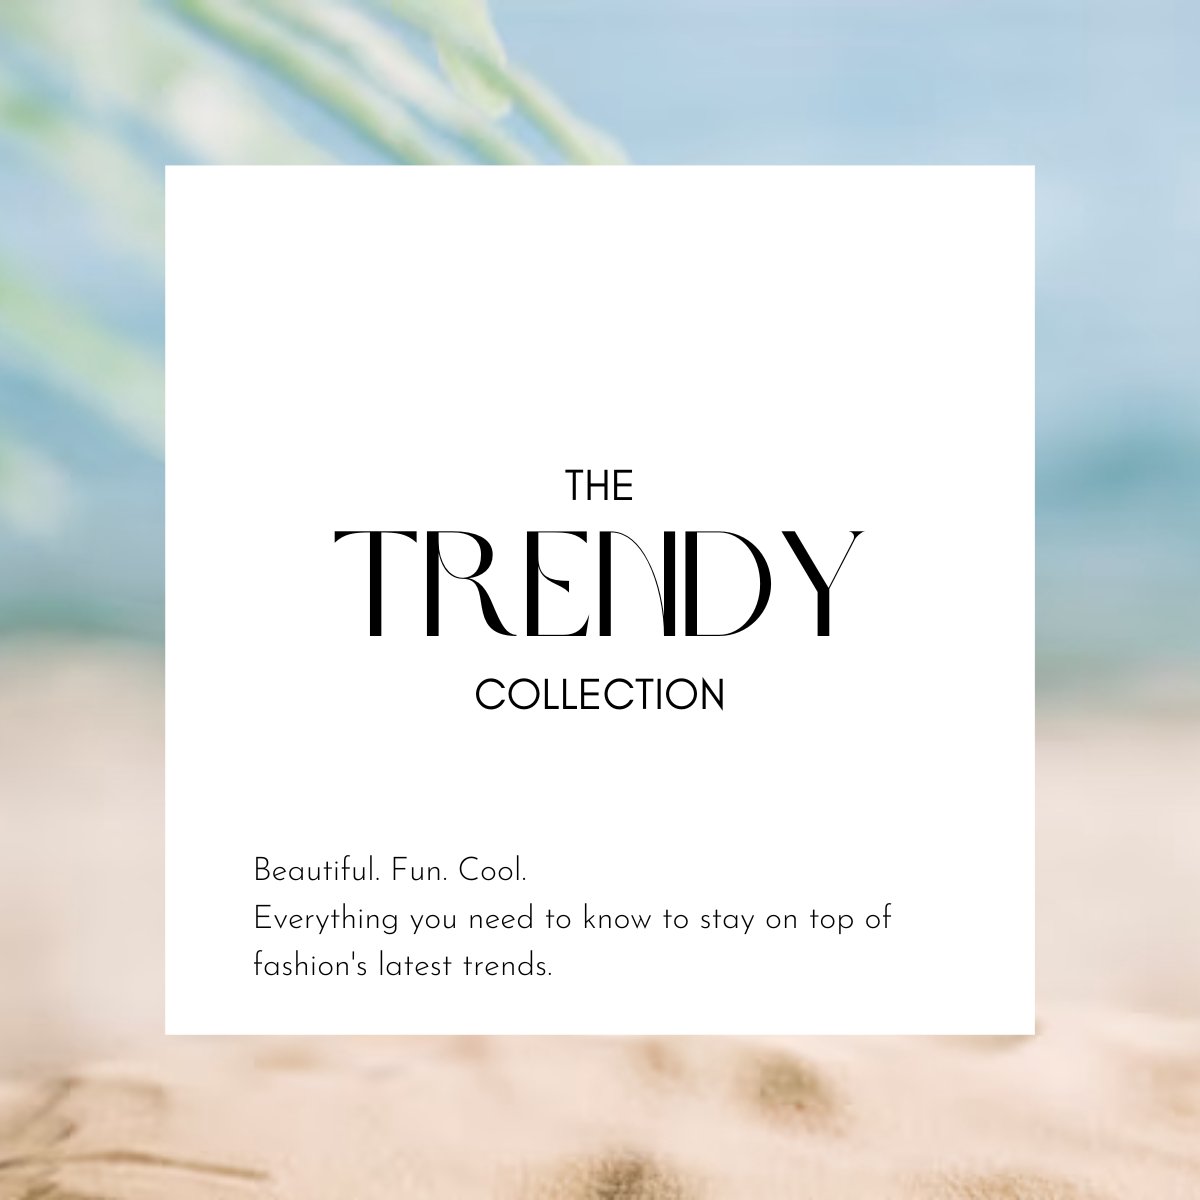 The Trendy Collection